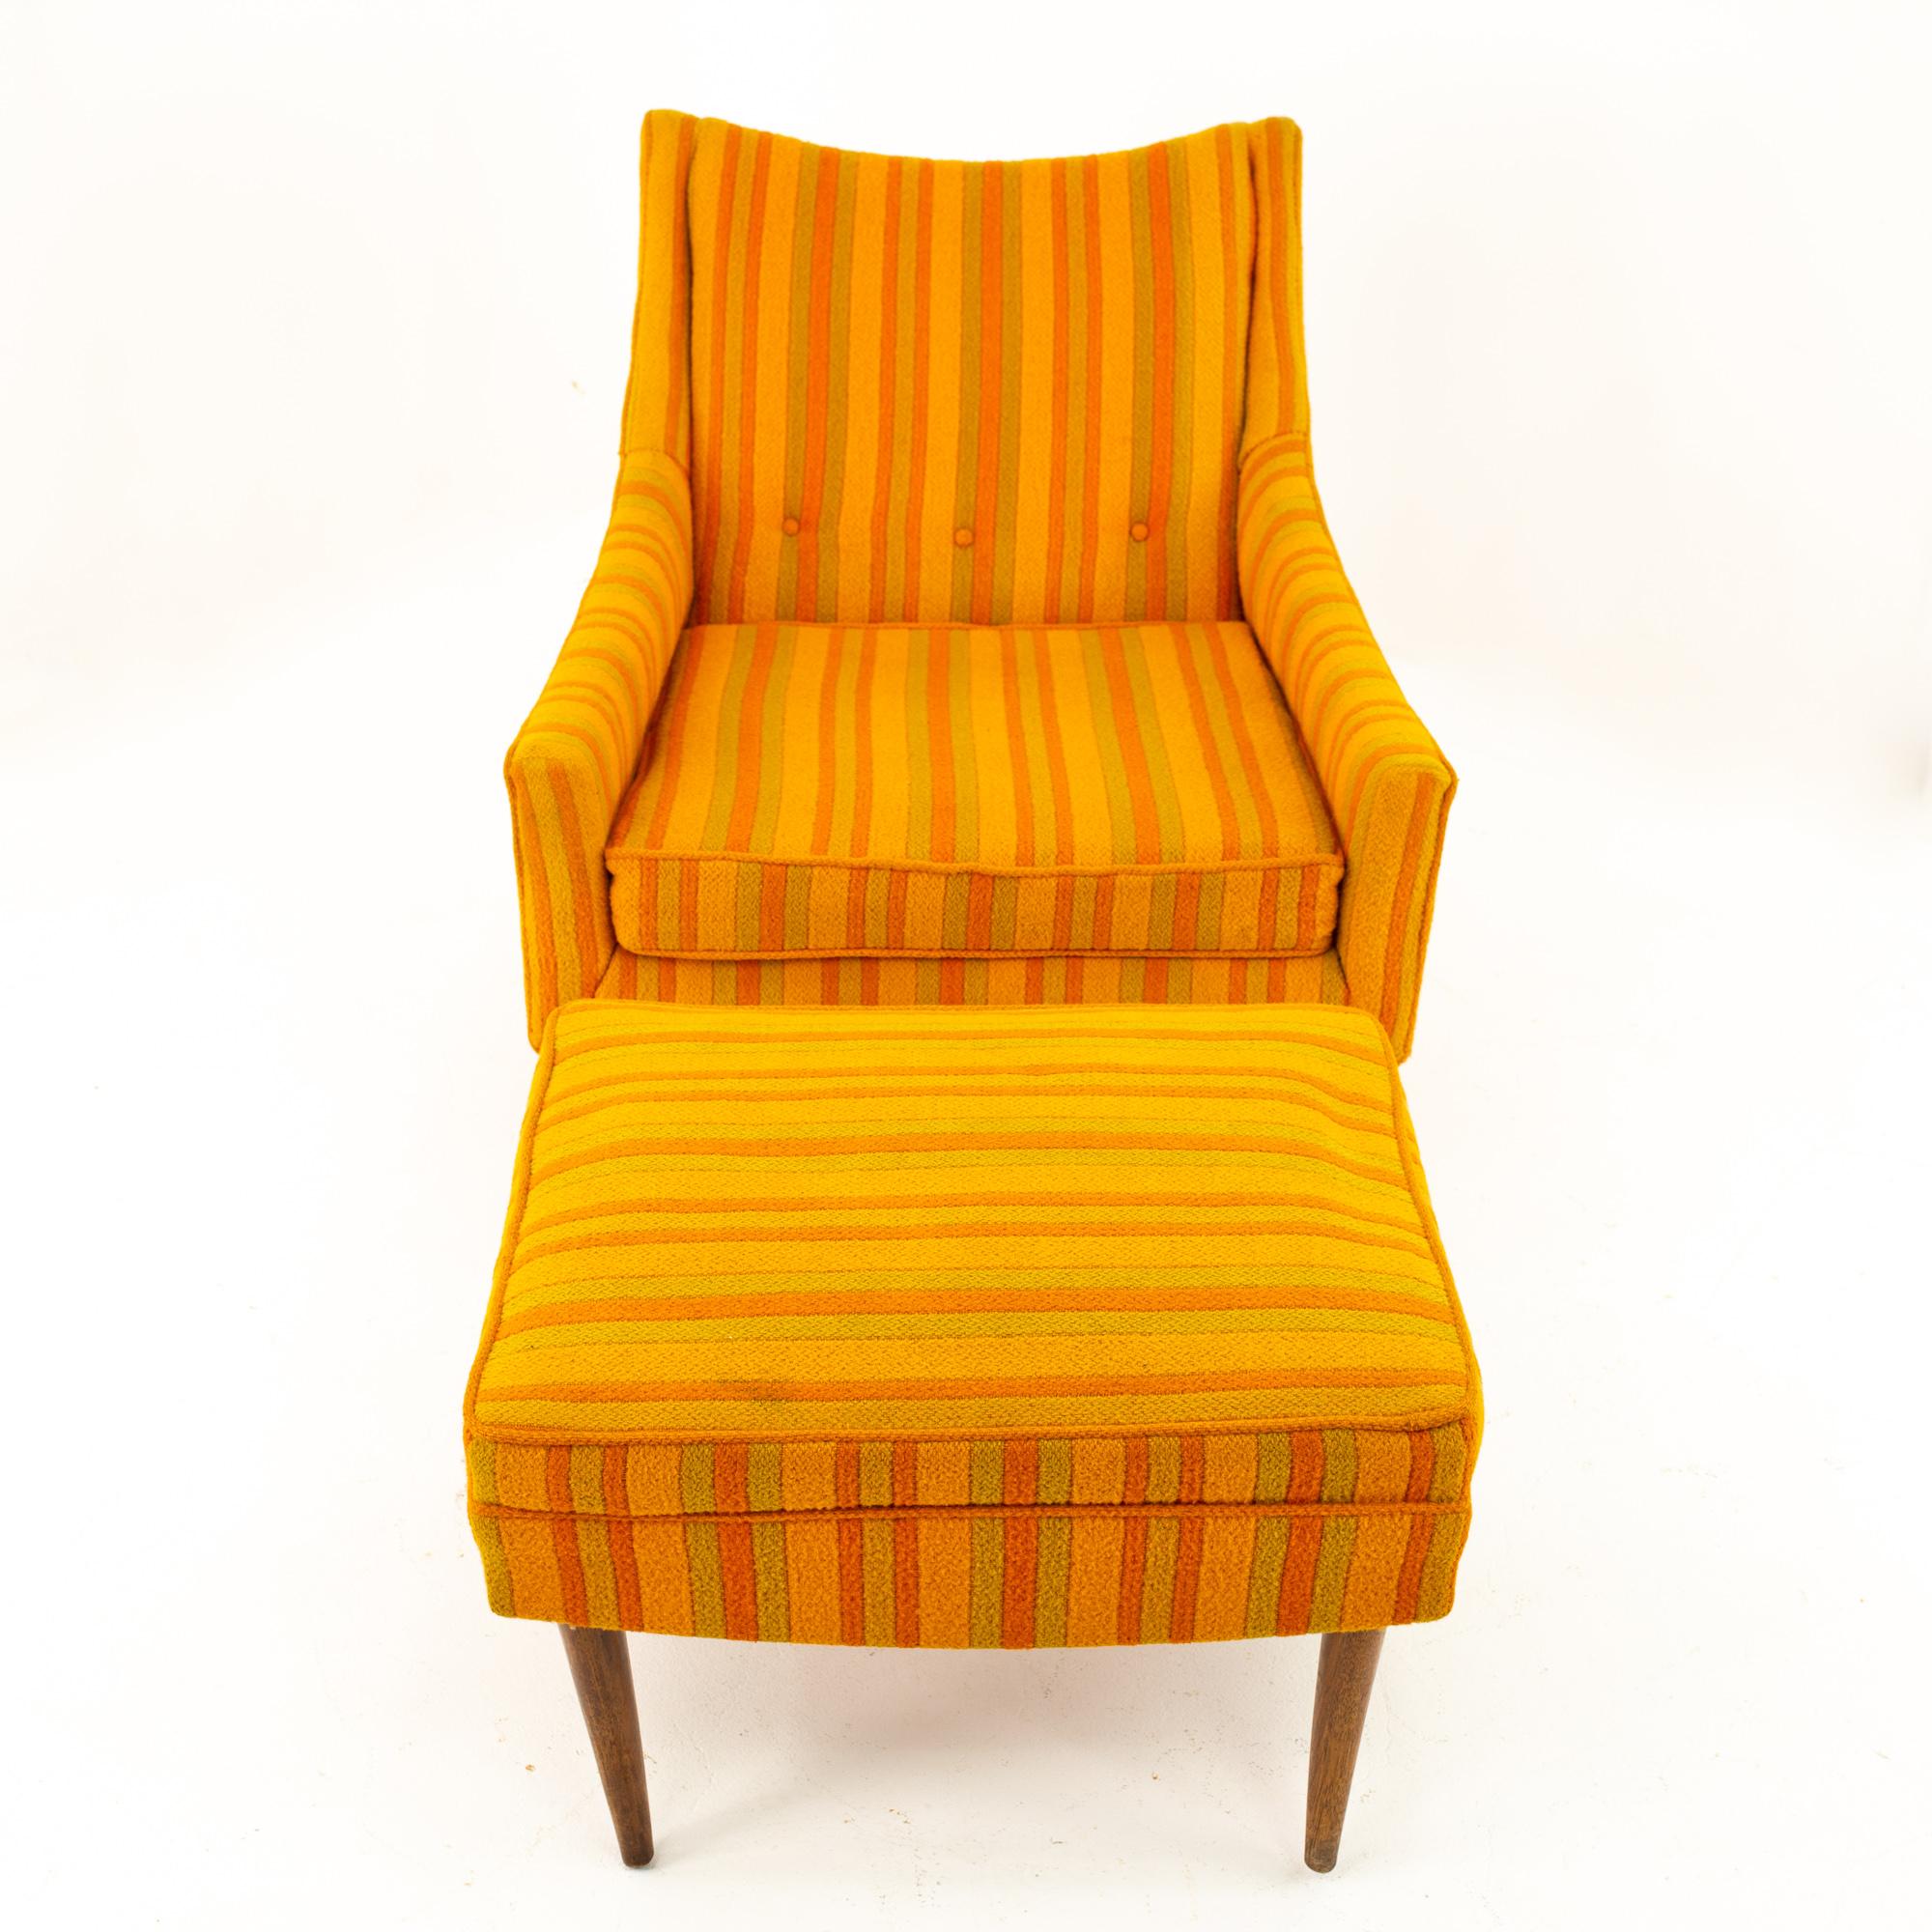 Adrian Pearsall style Kroehler midcentury orange and green striped lounge chair and ottoman

Chair measures: 26 wide x 35 deep x 29 high, with a seat height of 16 inches
Ottoman measures: 24 wide x 19.5 deep x 15 high

All pieces of furniture